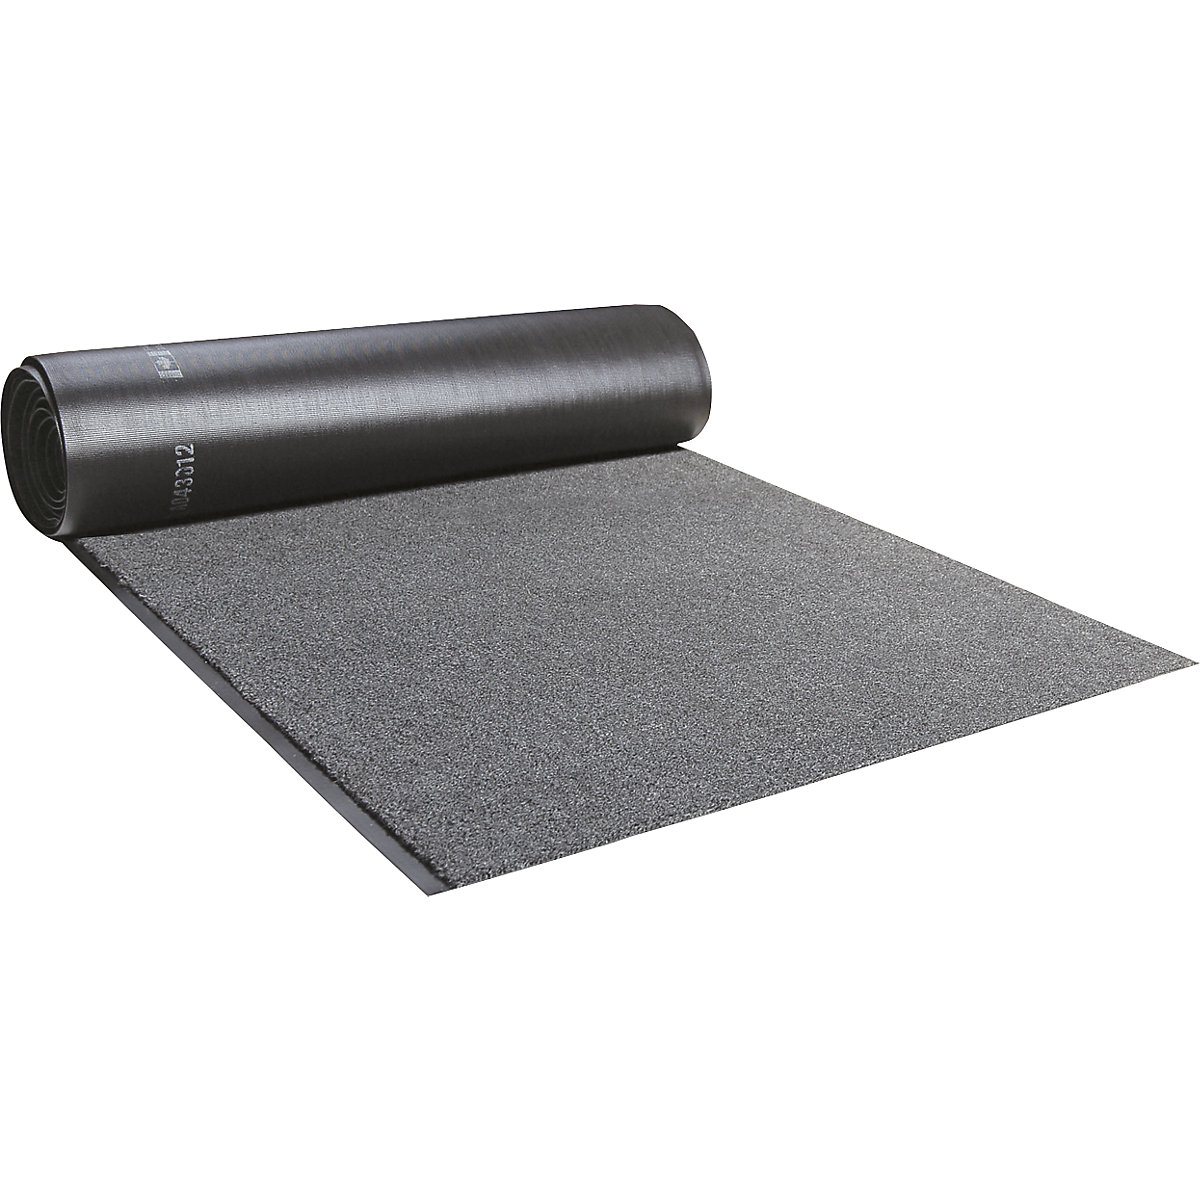 EAZYCARE AQUA entrance matting, width 1200 mm, sold by the metre, grey-6